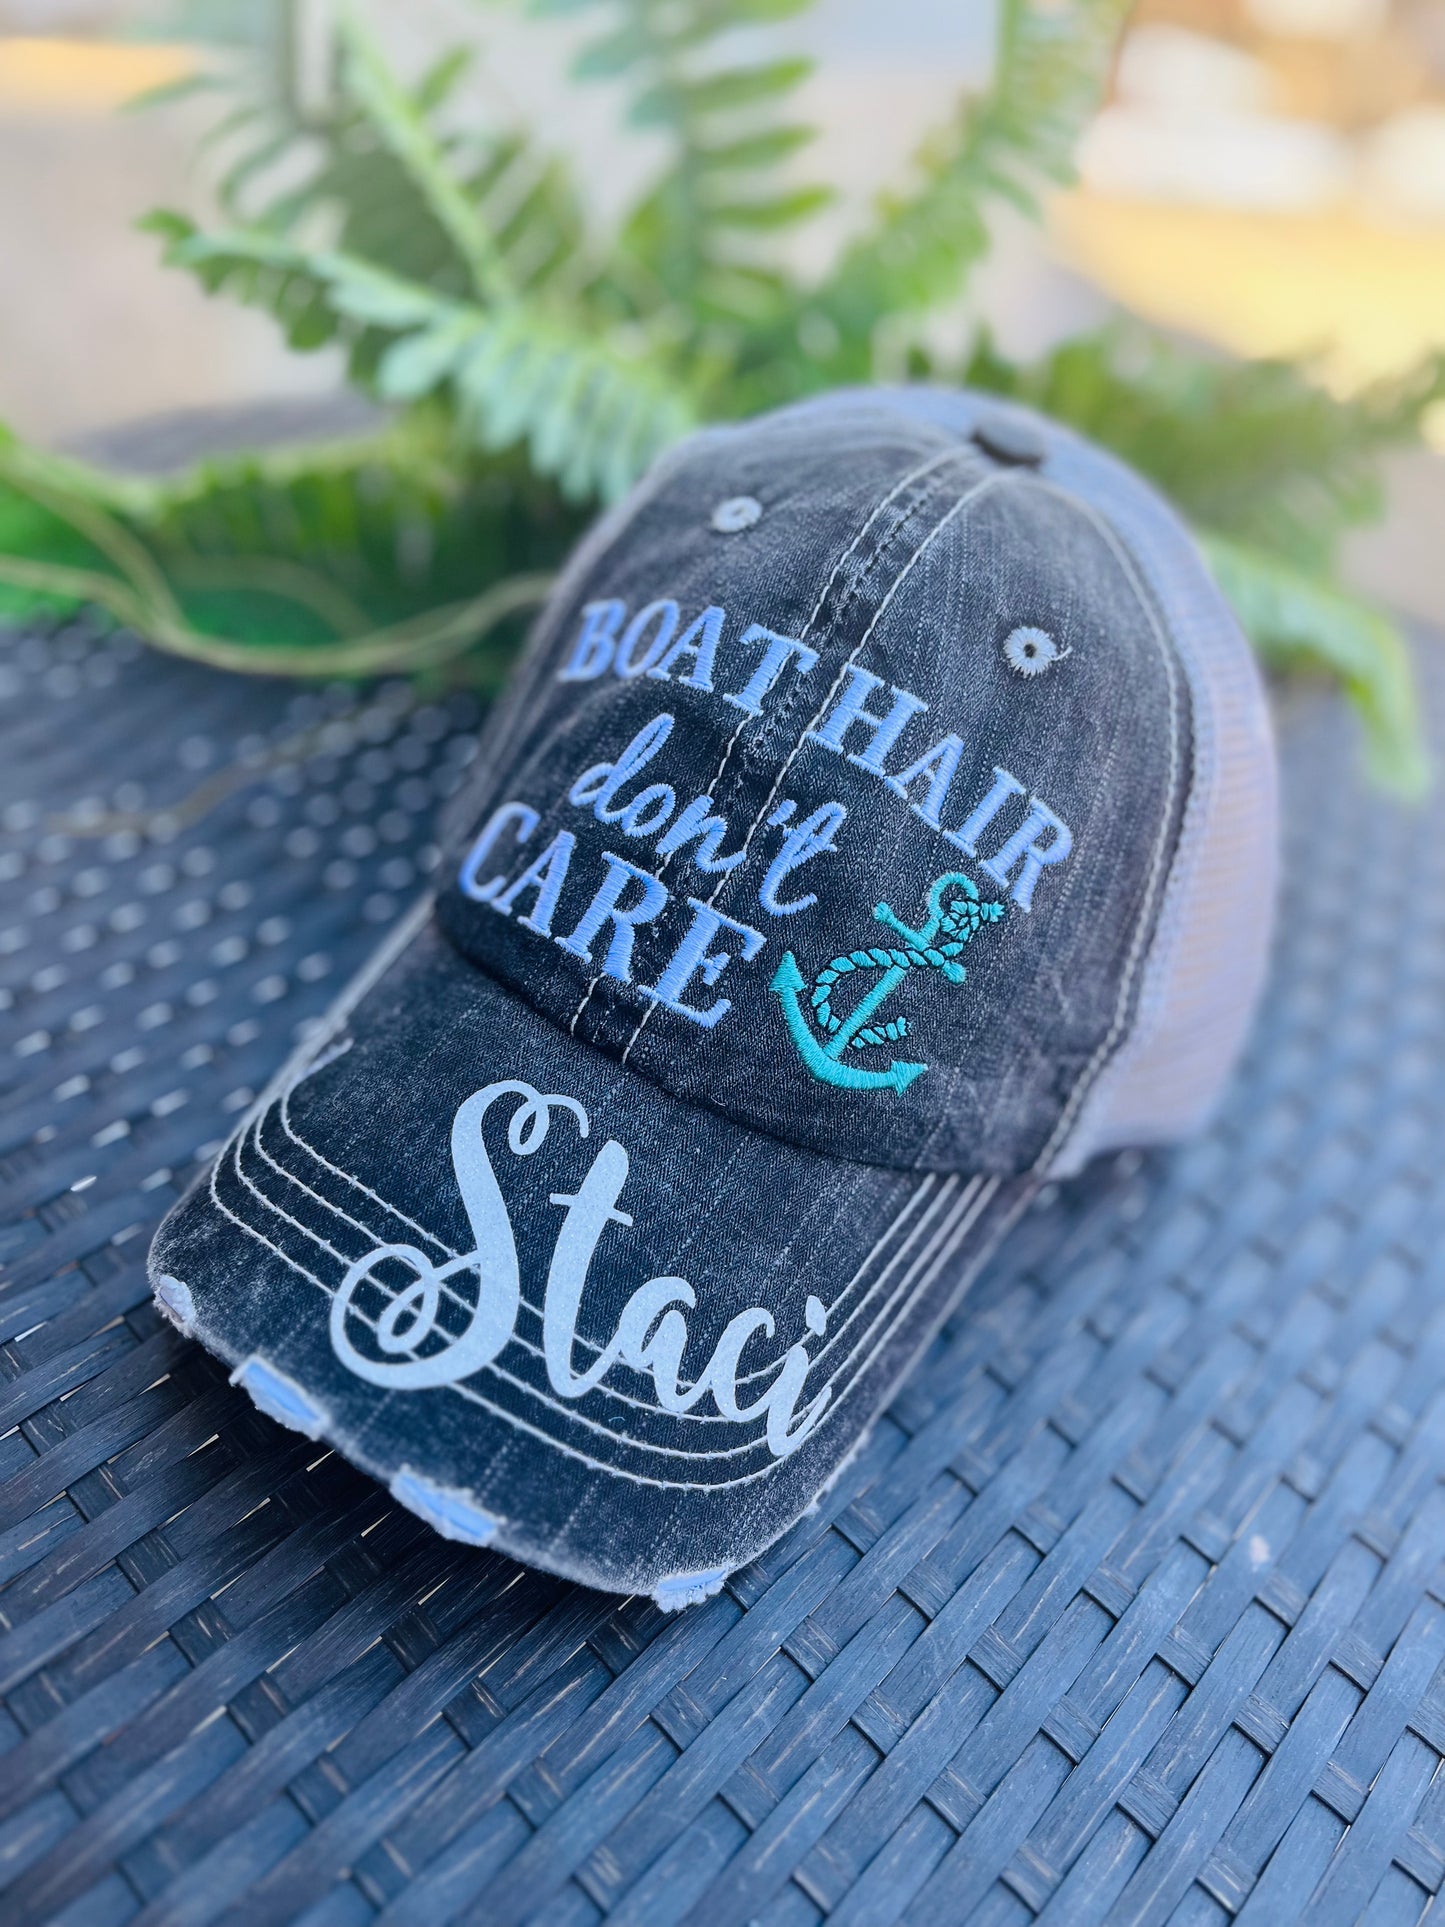 Boat hats Boat hair dont care FREE ship are Embroidered distressed gray trucker hats Anchors Pink Teal Boating - Stacy's Pink Martini Boutique